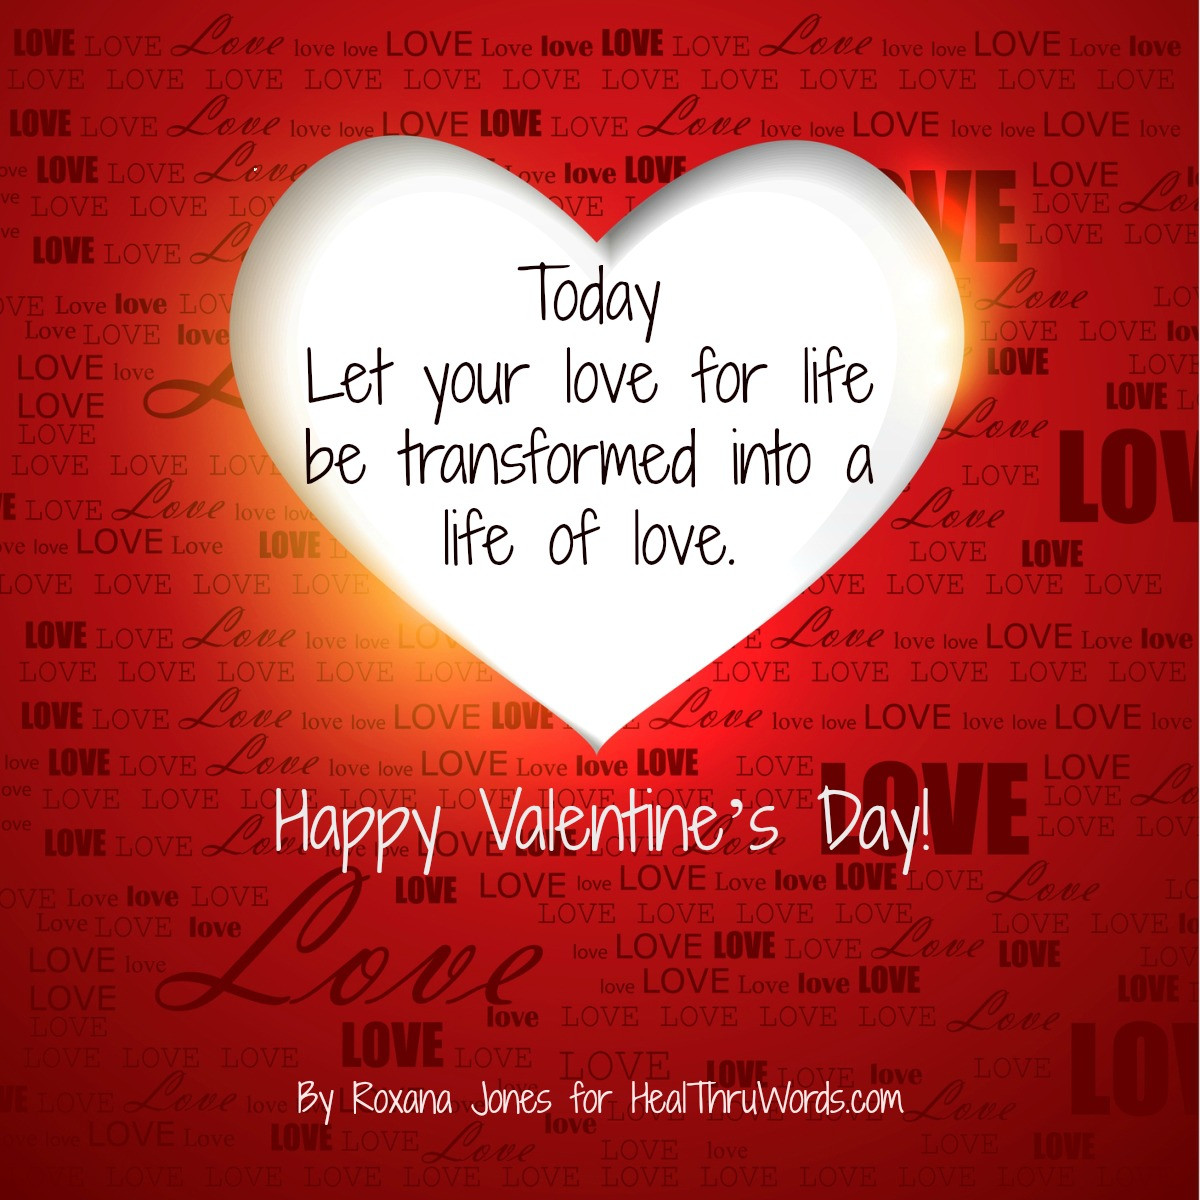 Famous Valentines Day Quotes
 Inspirational Valentine Quotes For Coworkers It s a